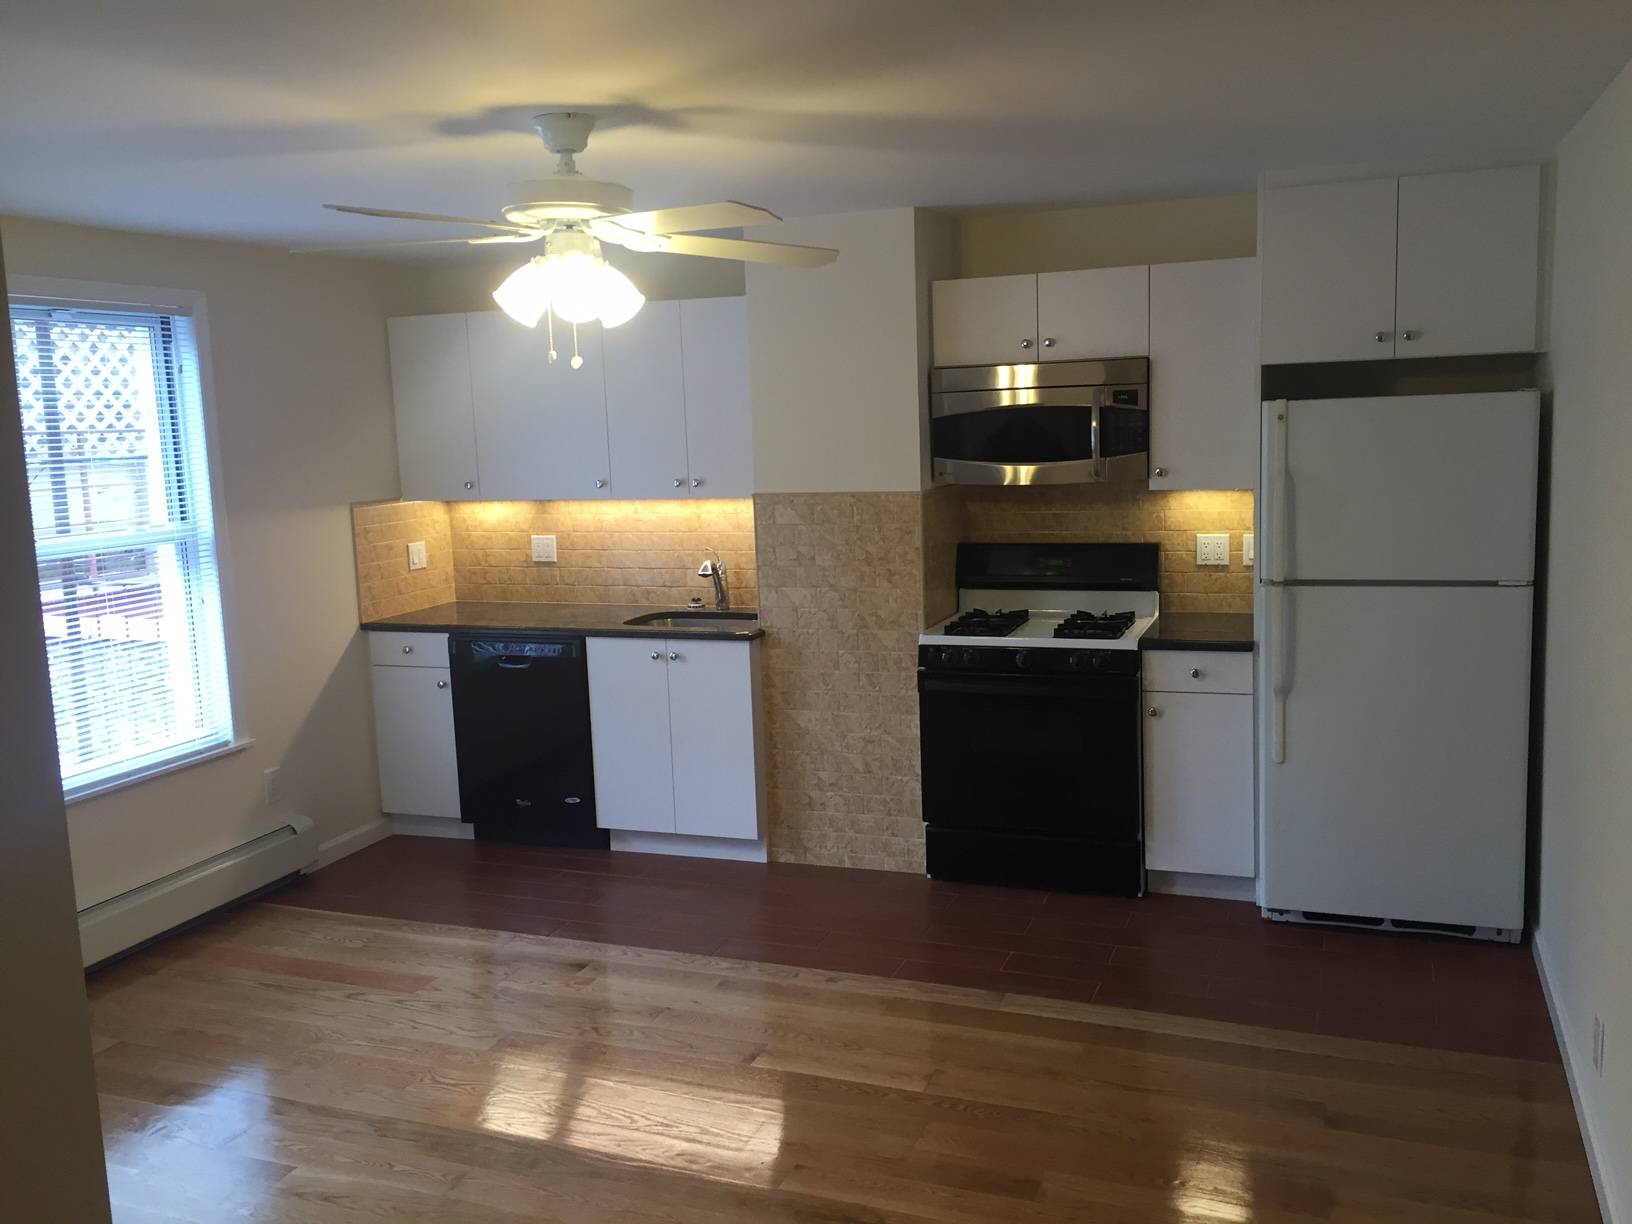 4 BEDROOM DUPLEX IN PRIME WILLIAMSBURG- BRAND NEW RENOVATION AND READY FOR IMMEDIATE MOVE-IN